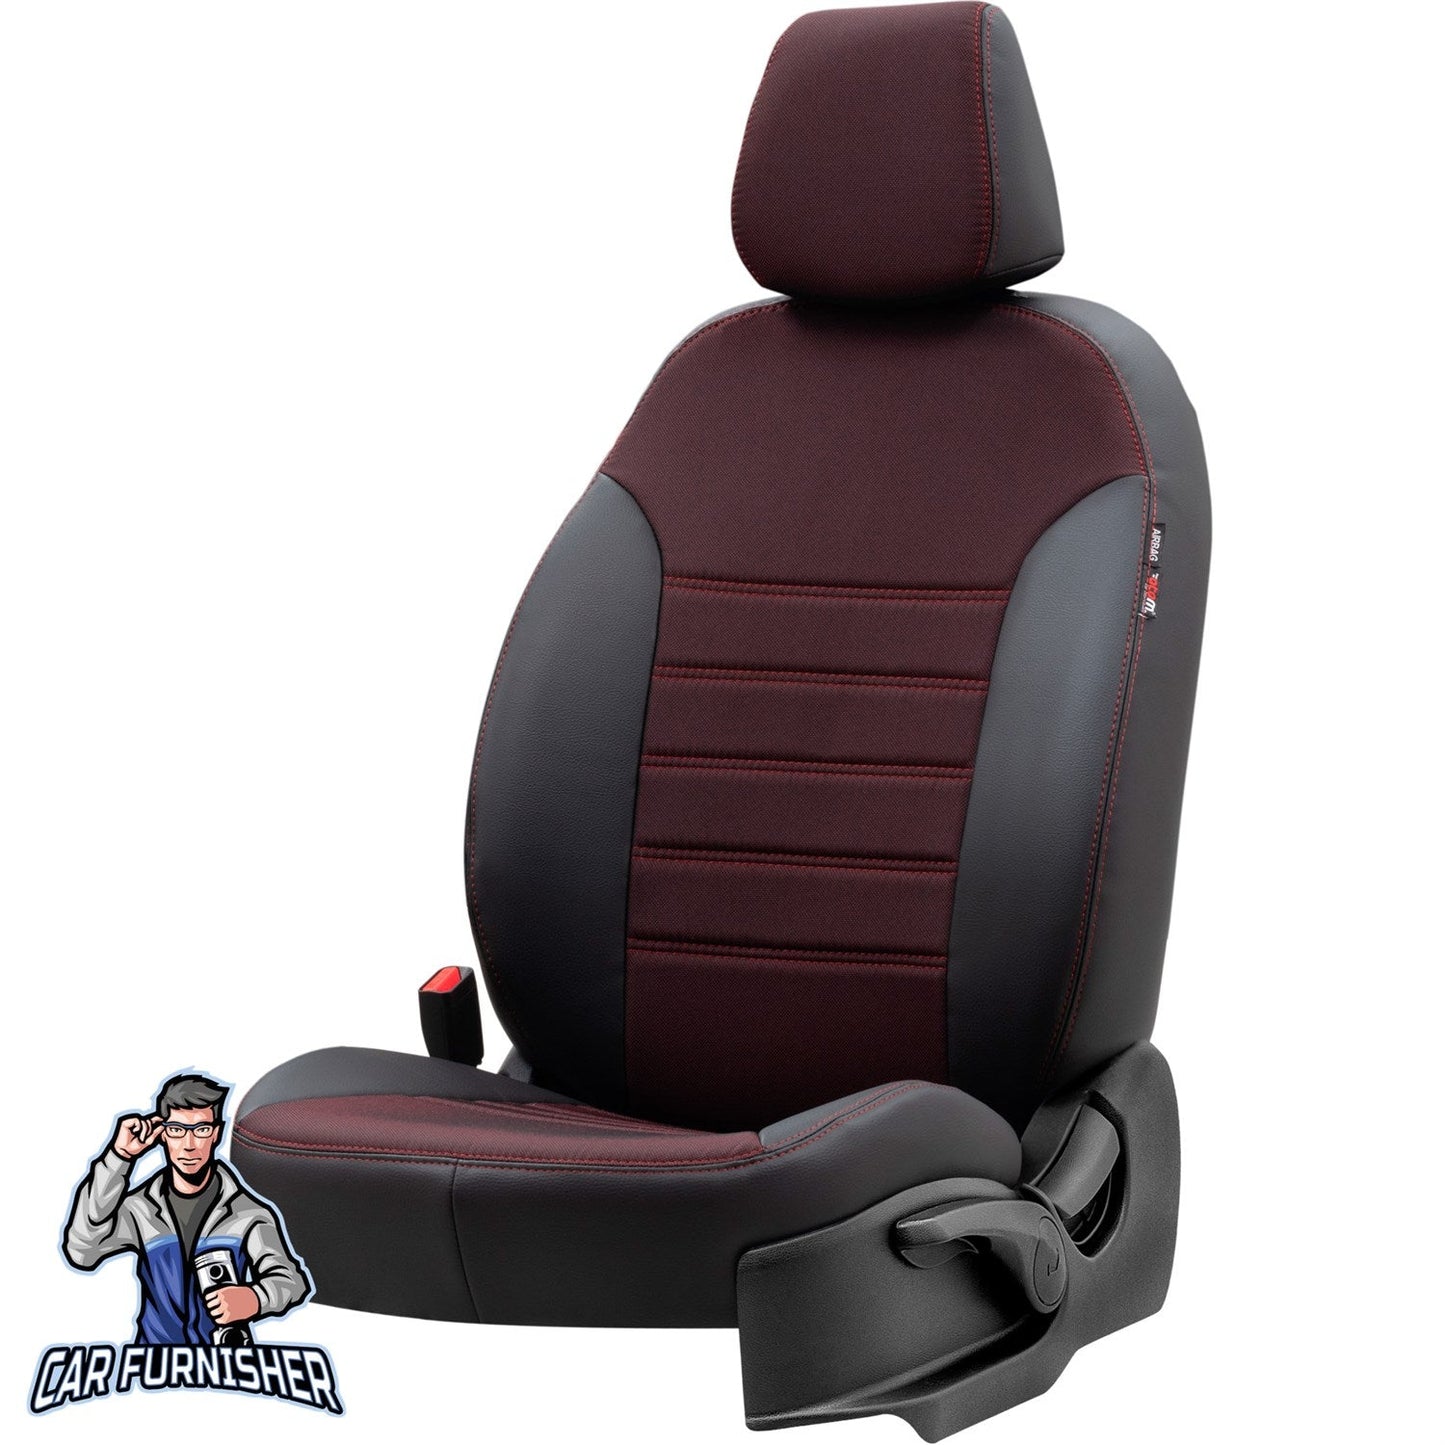 Volkswagen Crafter Seat Cover Paris Leather & Jacquard Design Red Leather & Jacquard Fabric